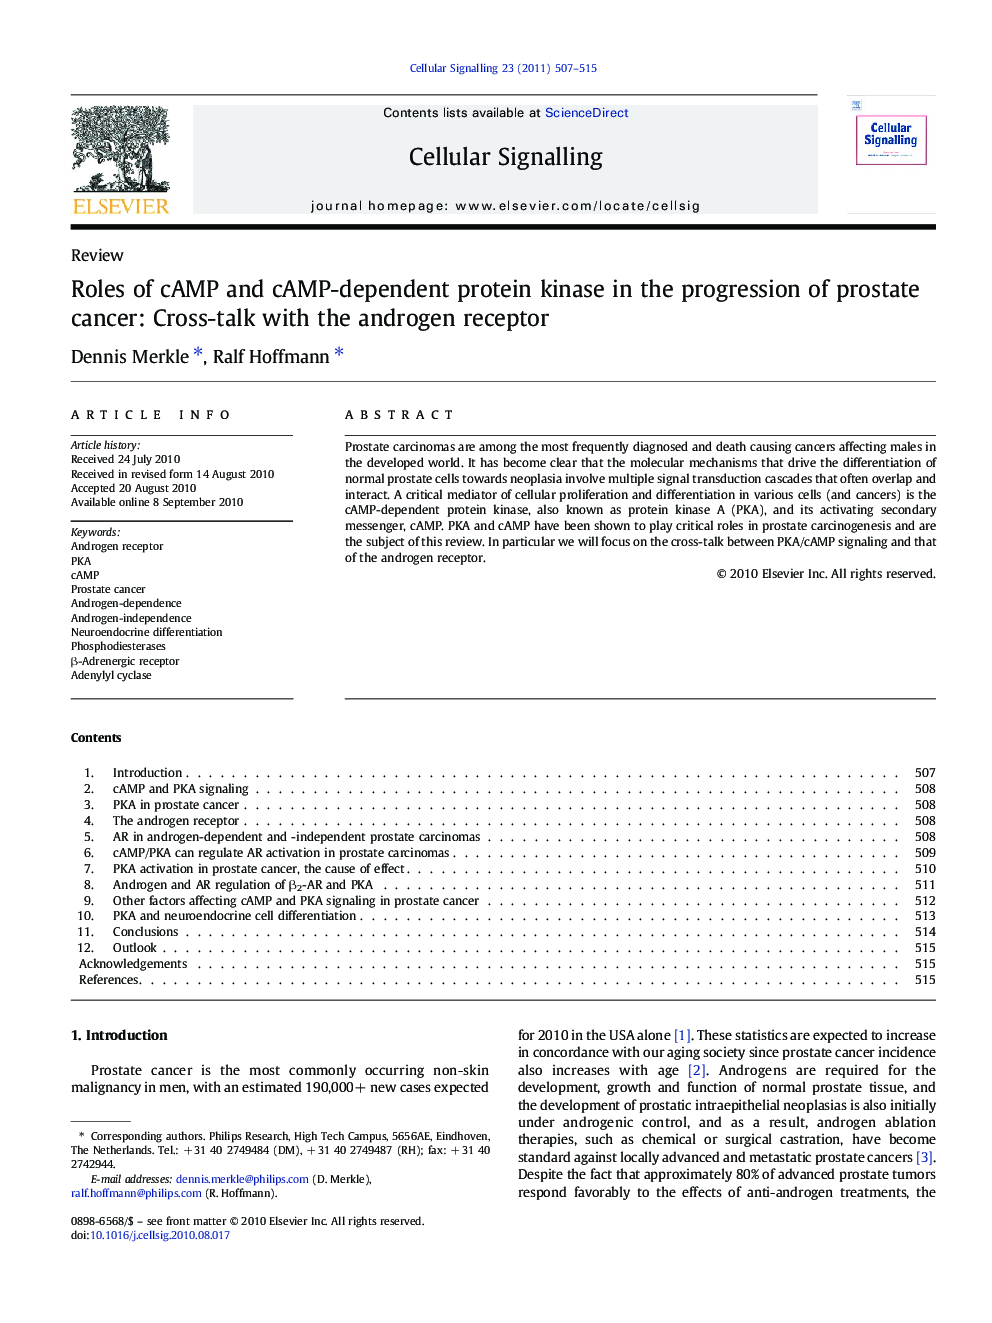 Roles of cAMP and cAMP-dependent protein kinase in the progression of prostate cancer: Cross-talk with the androgen receptor